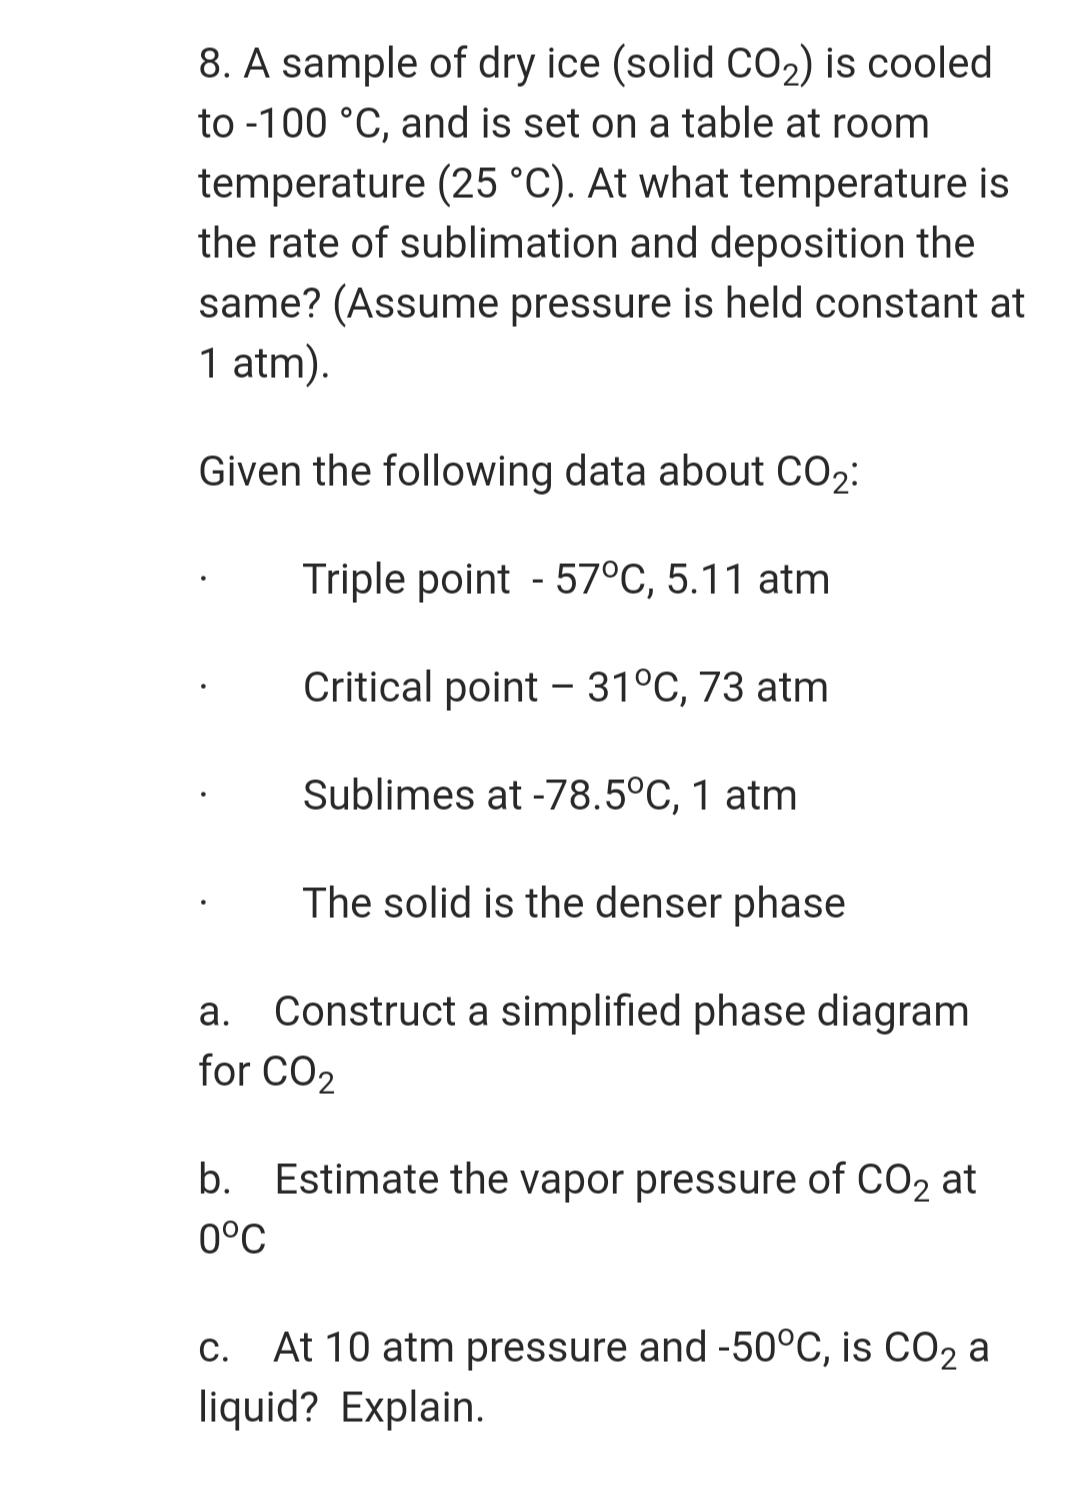 8. A sample of dry ice (solid CO2) is cooled
to -100 °C, and is set on a table at room
temperature (25 °C). At what temperature is
the rate of sublimation and deposition the
same? (Assume pressure is held constant at
1 atm).
Given the following data about CO2:
Triple point - 57°C, 5.11 atm
Critical point - 31°C, 73 atm
Sublimes at -78.5°C, 1 atm
The solid is the denser phase
Construct a simplified phase diagram
for CO2
а.
b.
Estimate the vapor pressure of CO2 at
0°C
c. At 10 atm pressure and -50°C, is CO2 a
liquid? Explain.
С.
